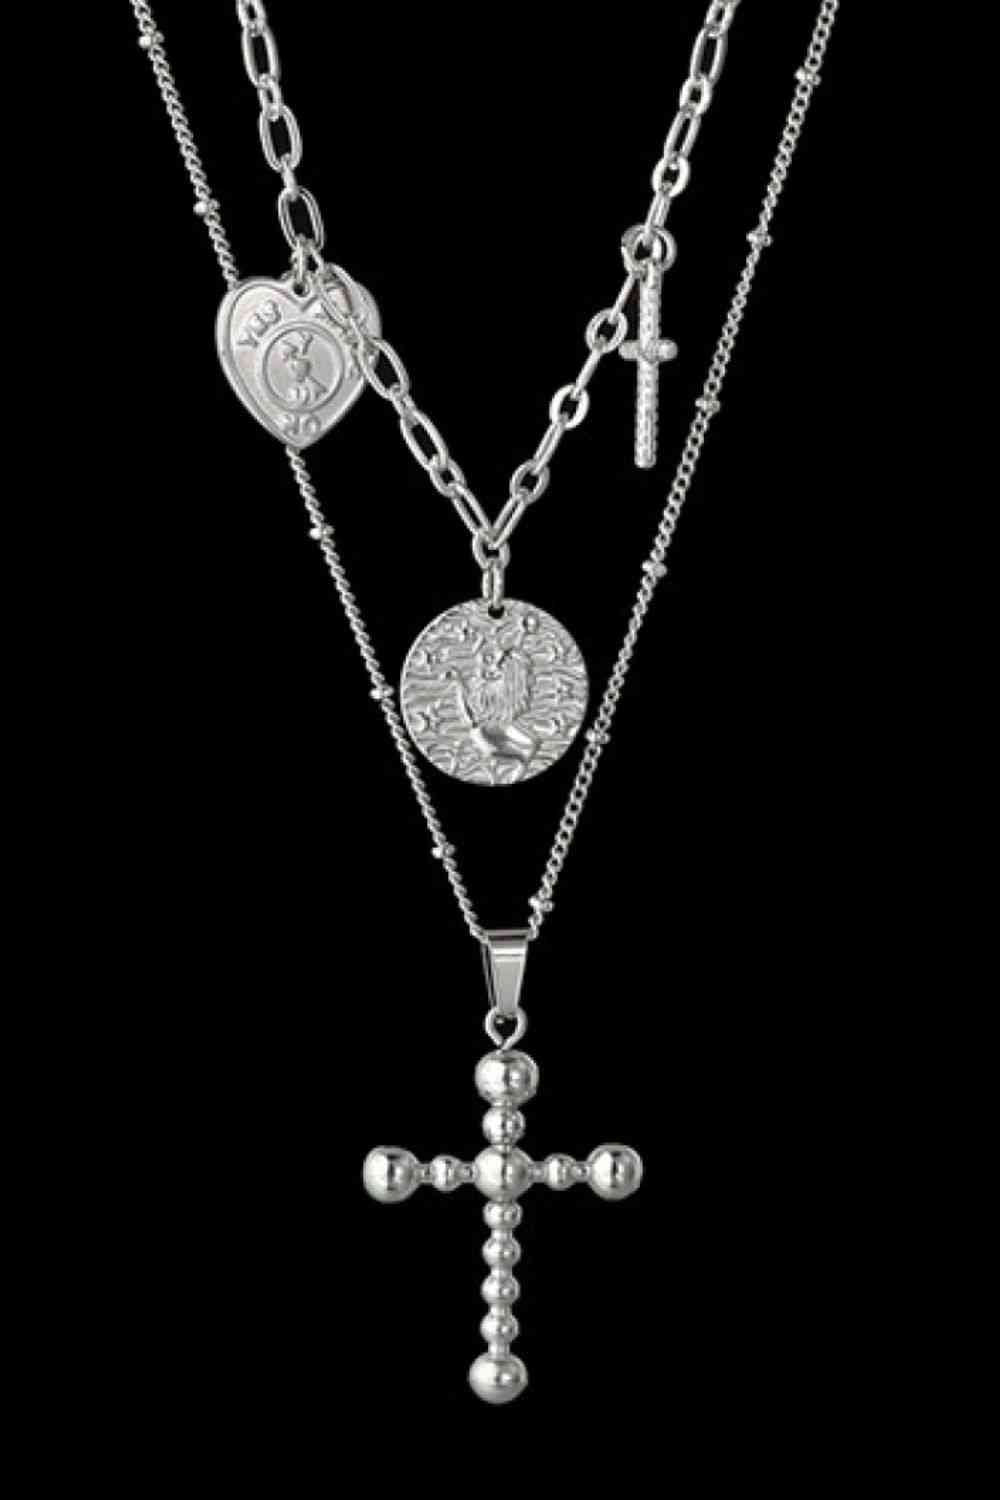 Stainless Steel Antique Coins & Cross Necklace